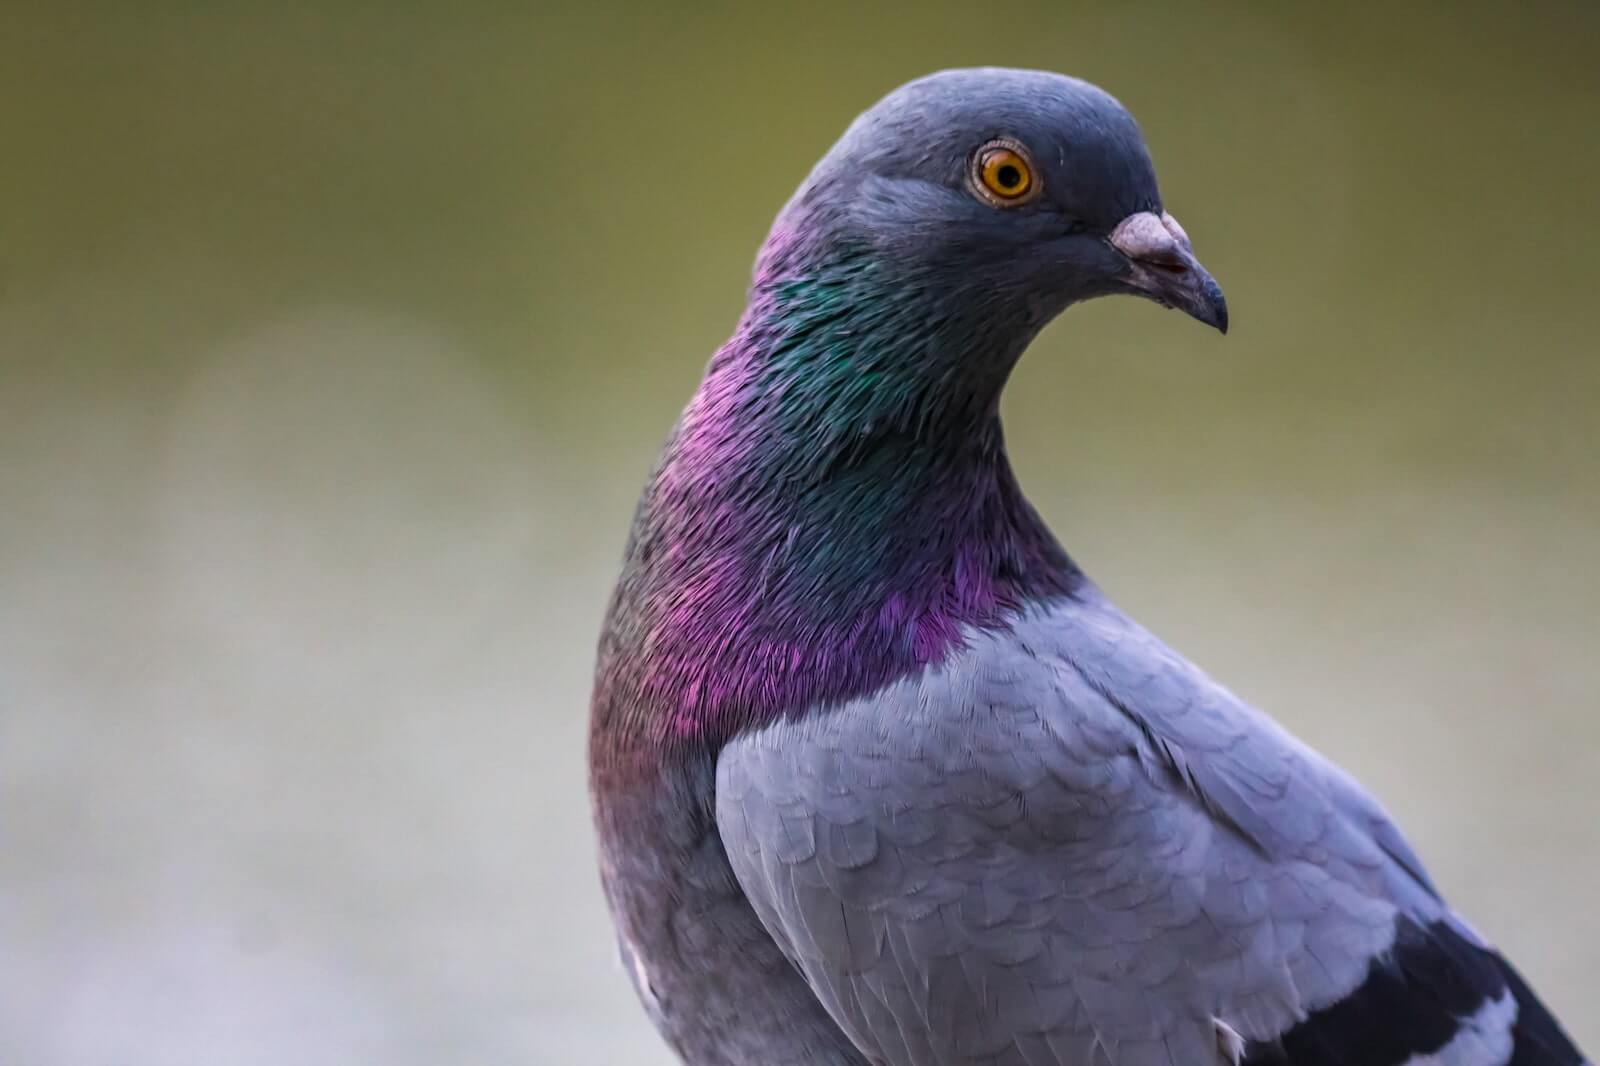 Image of a pigeon in the wild